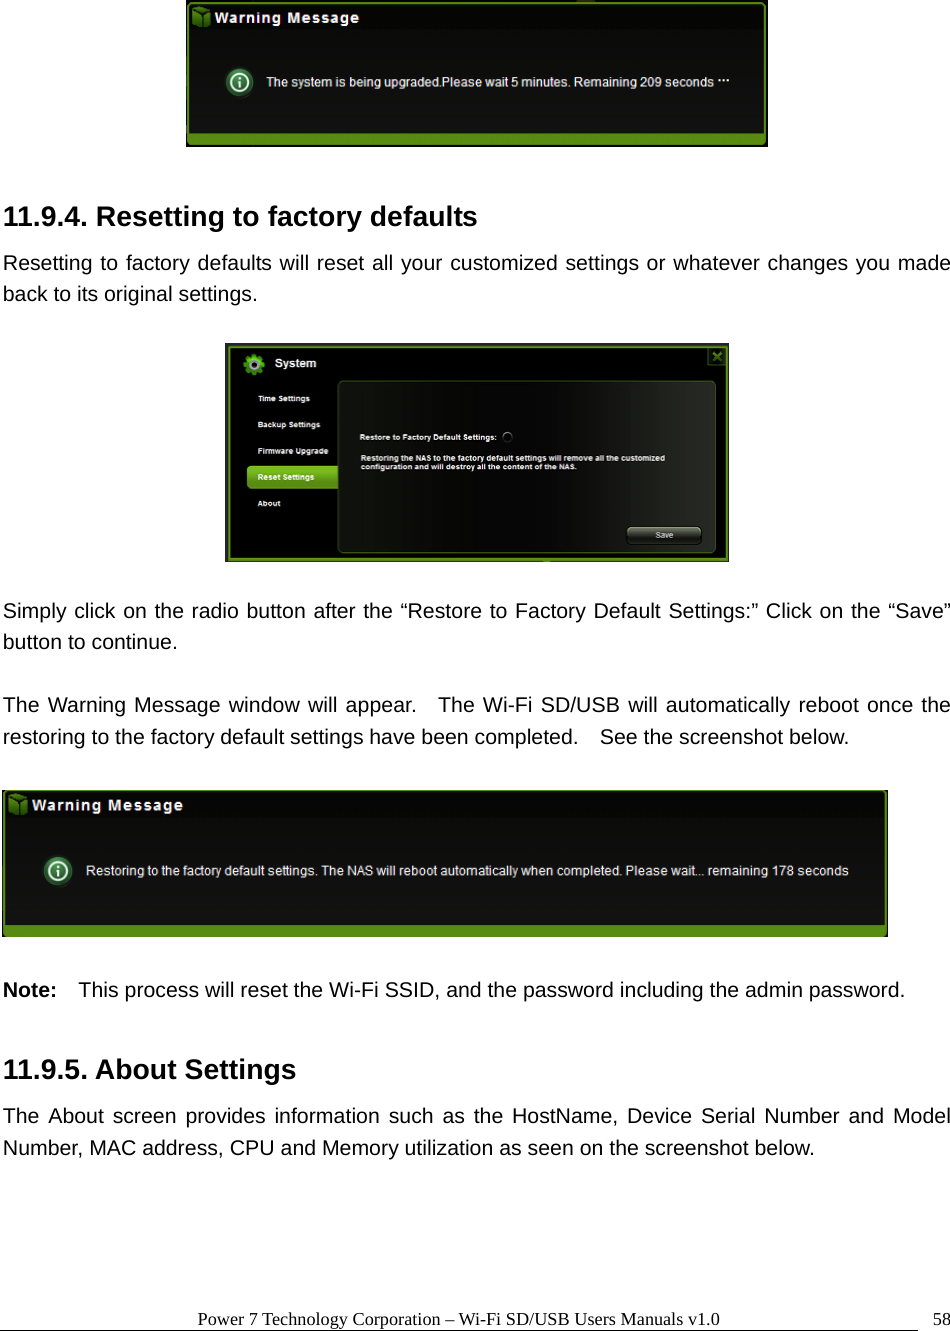 Power 7 Technology Corporation – Wi-Fi SD/USB Users Manuals v1.0  58  11.9.4. Resetting to factory defaults Resetting to factory defaults will reset all your customized settings or whatever changes you made back to its original settings.    Simply click on the radio button after the “Restore to Factory Default Settings:” Click on the “Save” button to continue.    The Warning Message window will appear.  The Wi-Fi SD/USB will automatically reboot once the restoring to the factory default settings have been completed.    See the screenshot below.      Note:  This process will reset the Wi-Fi SSID, and the password including the admin password.    11.9.5. About Settings The About screen provides information such as the HostName, Device Serial Number and Model Number, MAC address, CPU and Memory utilization as seen on the screenshot below.  